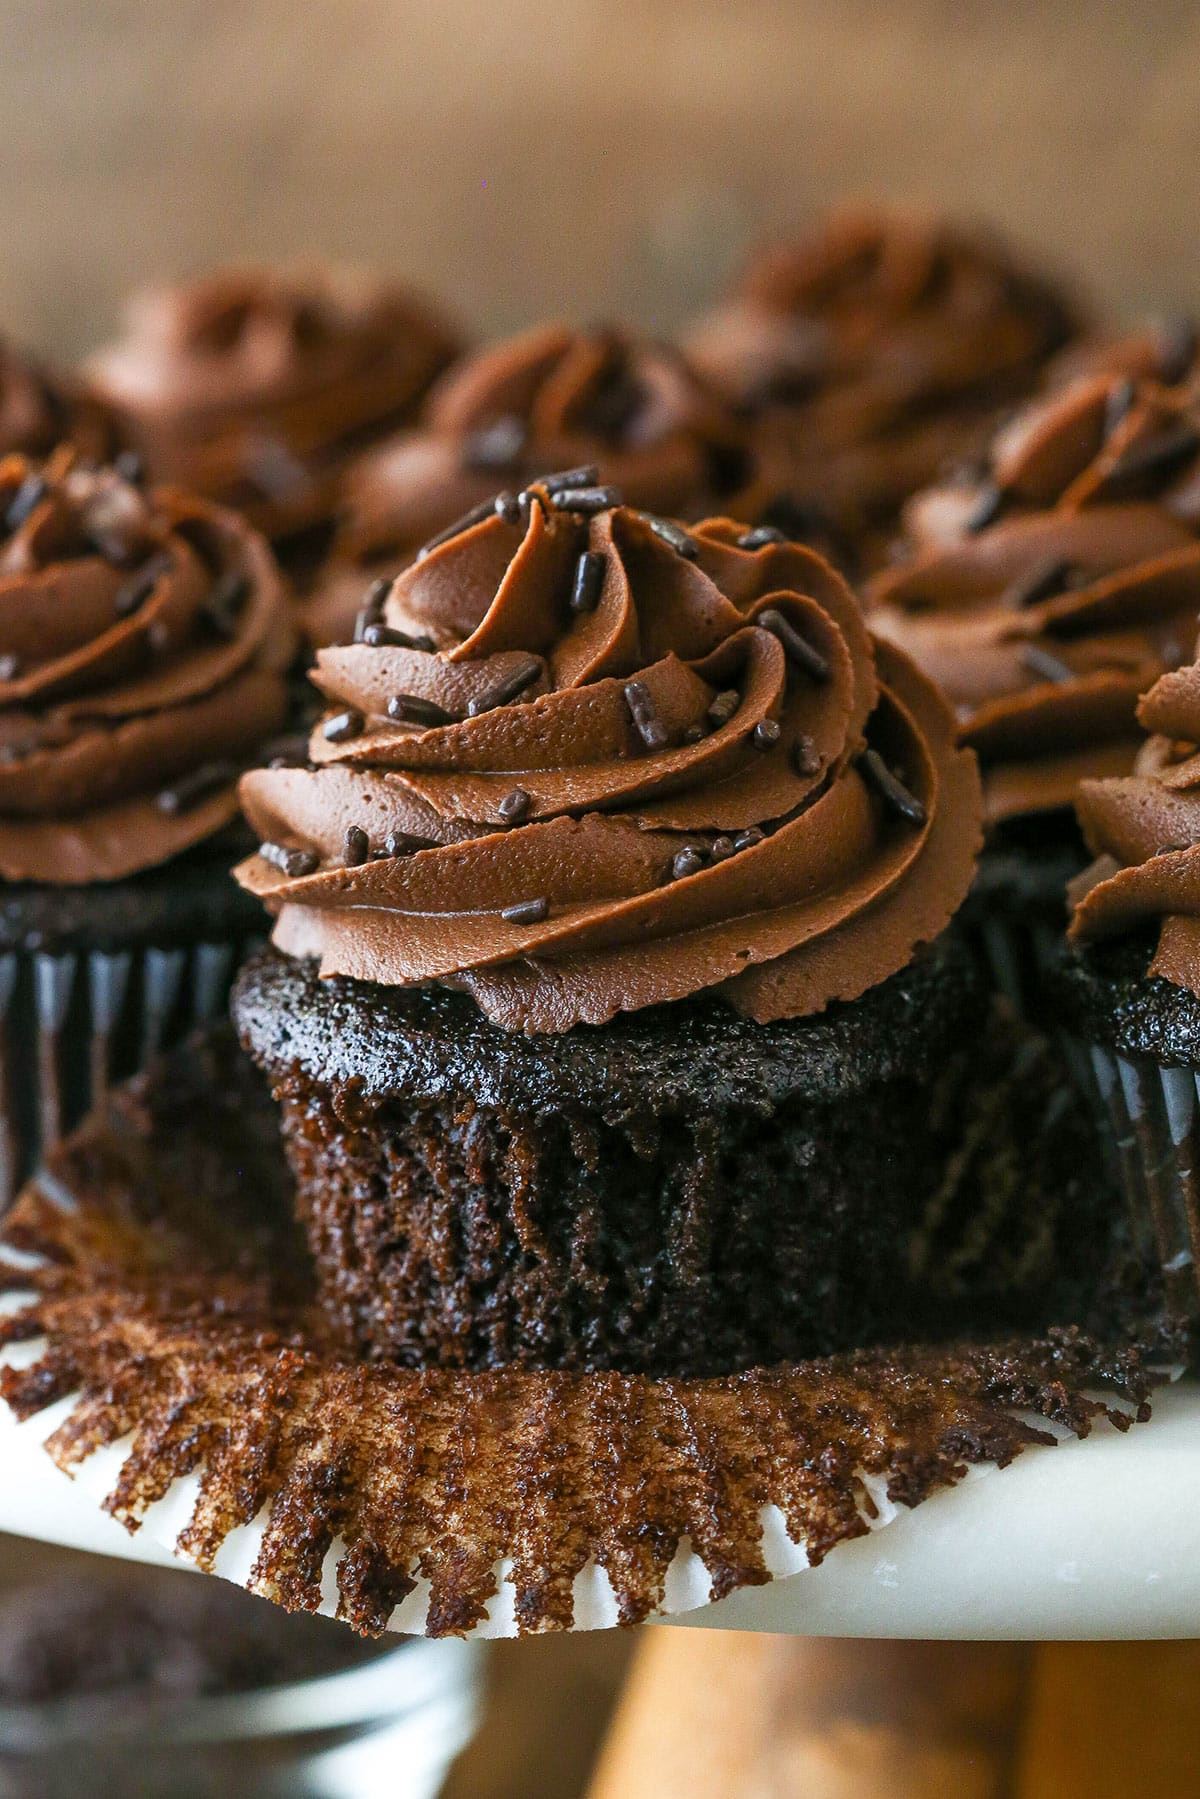 Simply Perfect Chocolate Cupcakes - Moist deeply chocolate-y